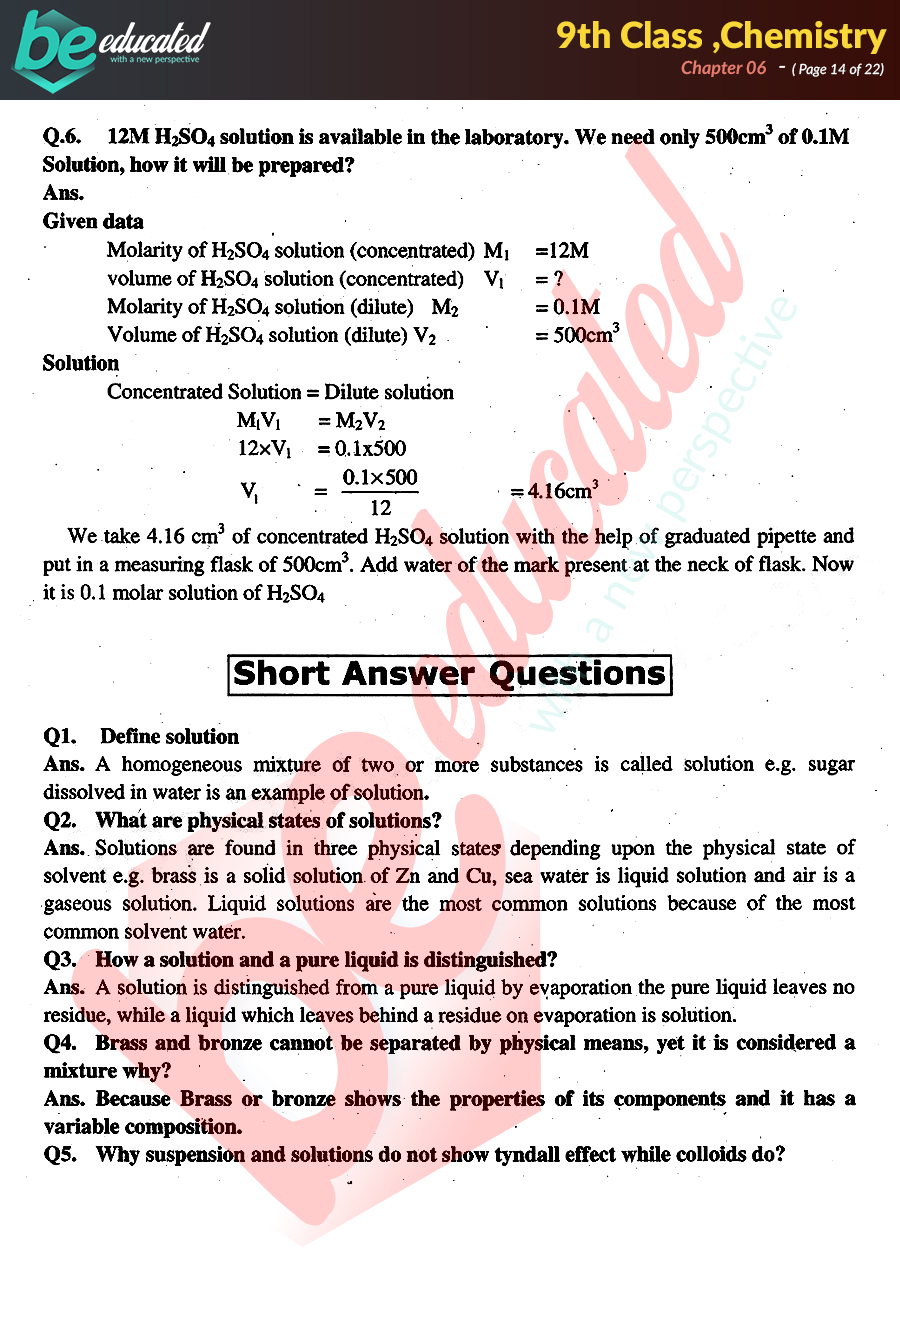 9th class chemistry notes in english pdf download